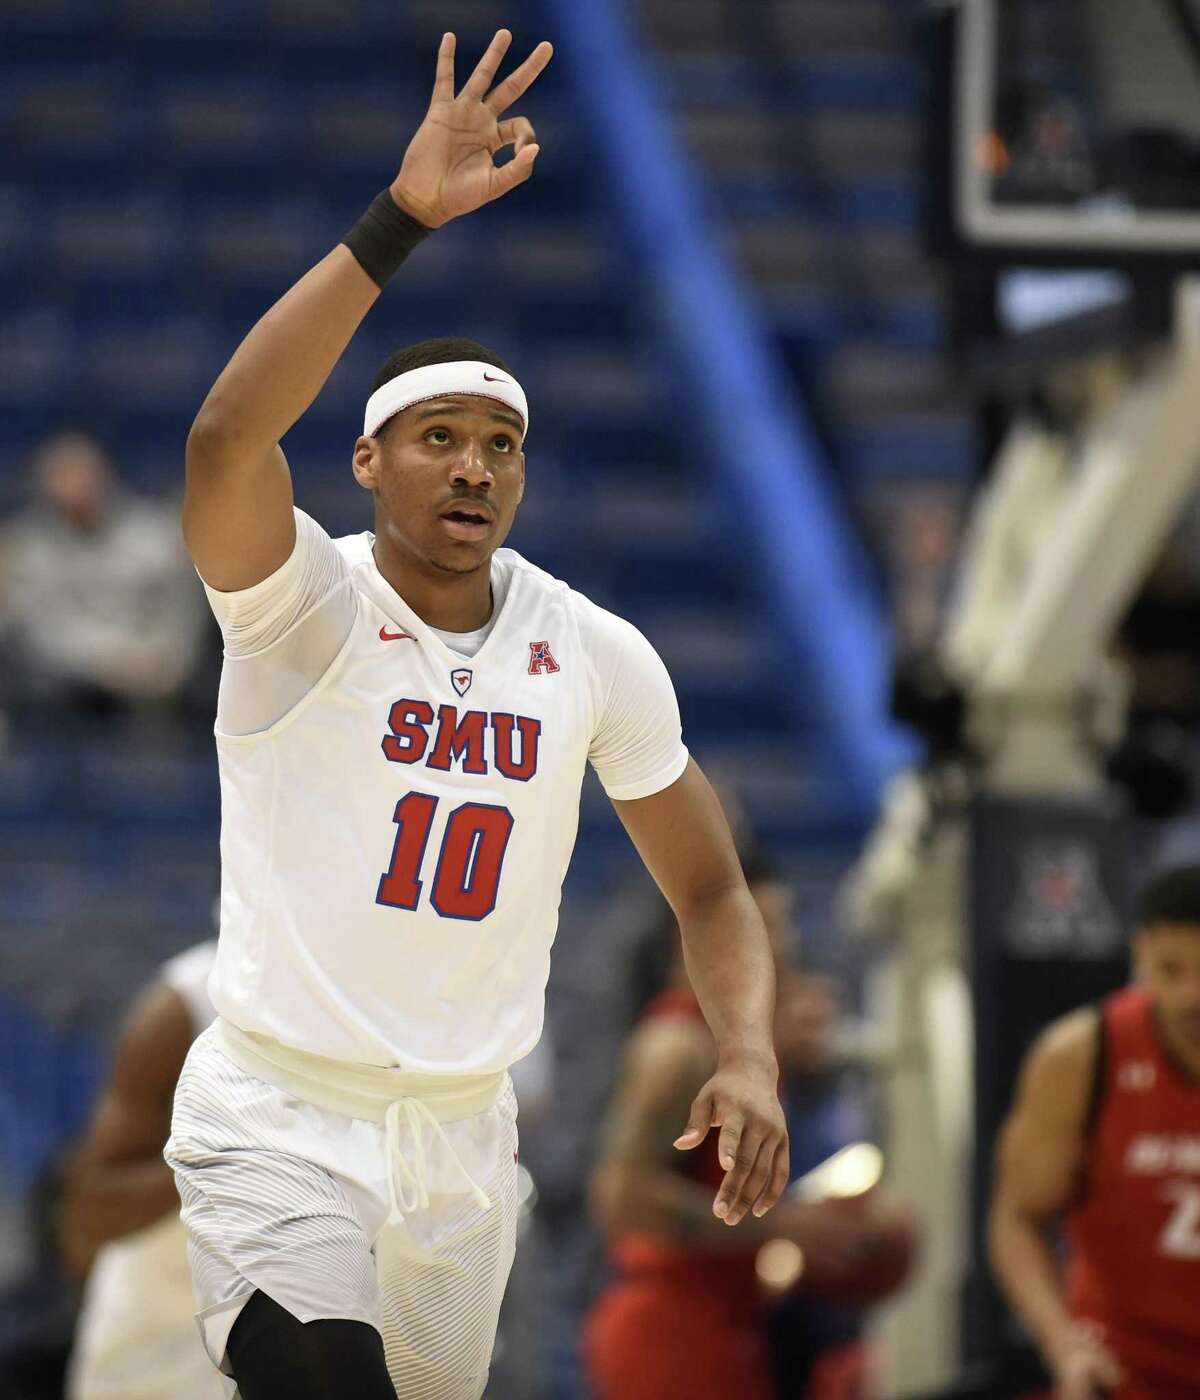 SMU guard Jarrey Foster (10) signals a 3-pointer during the second half against Cincinnati of the 2017 AAC tournament championship game on March 12, 2017, at the XL Center in Hartford, Conn.